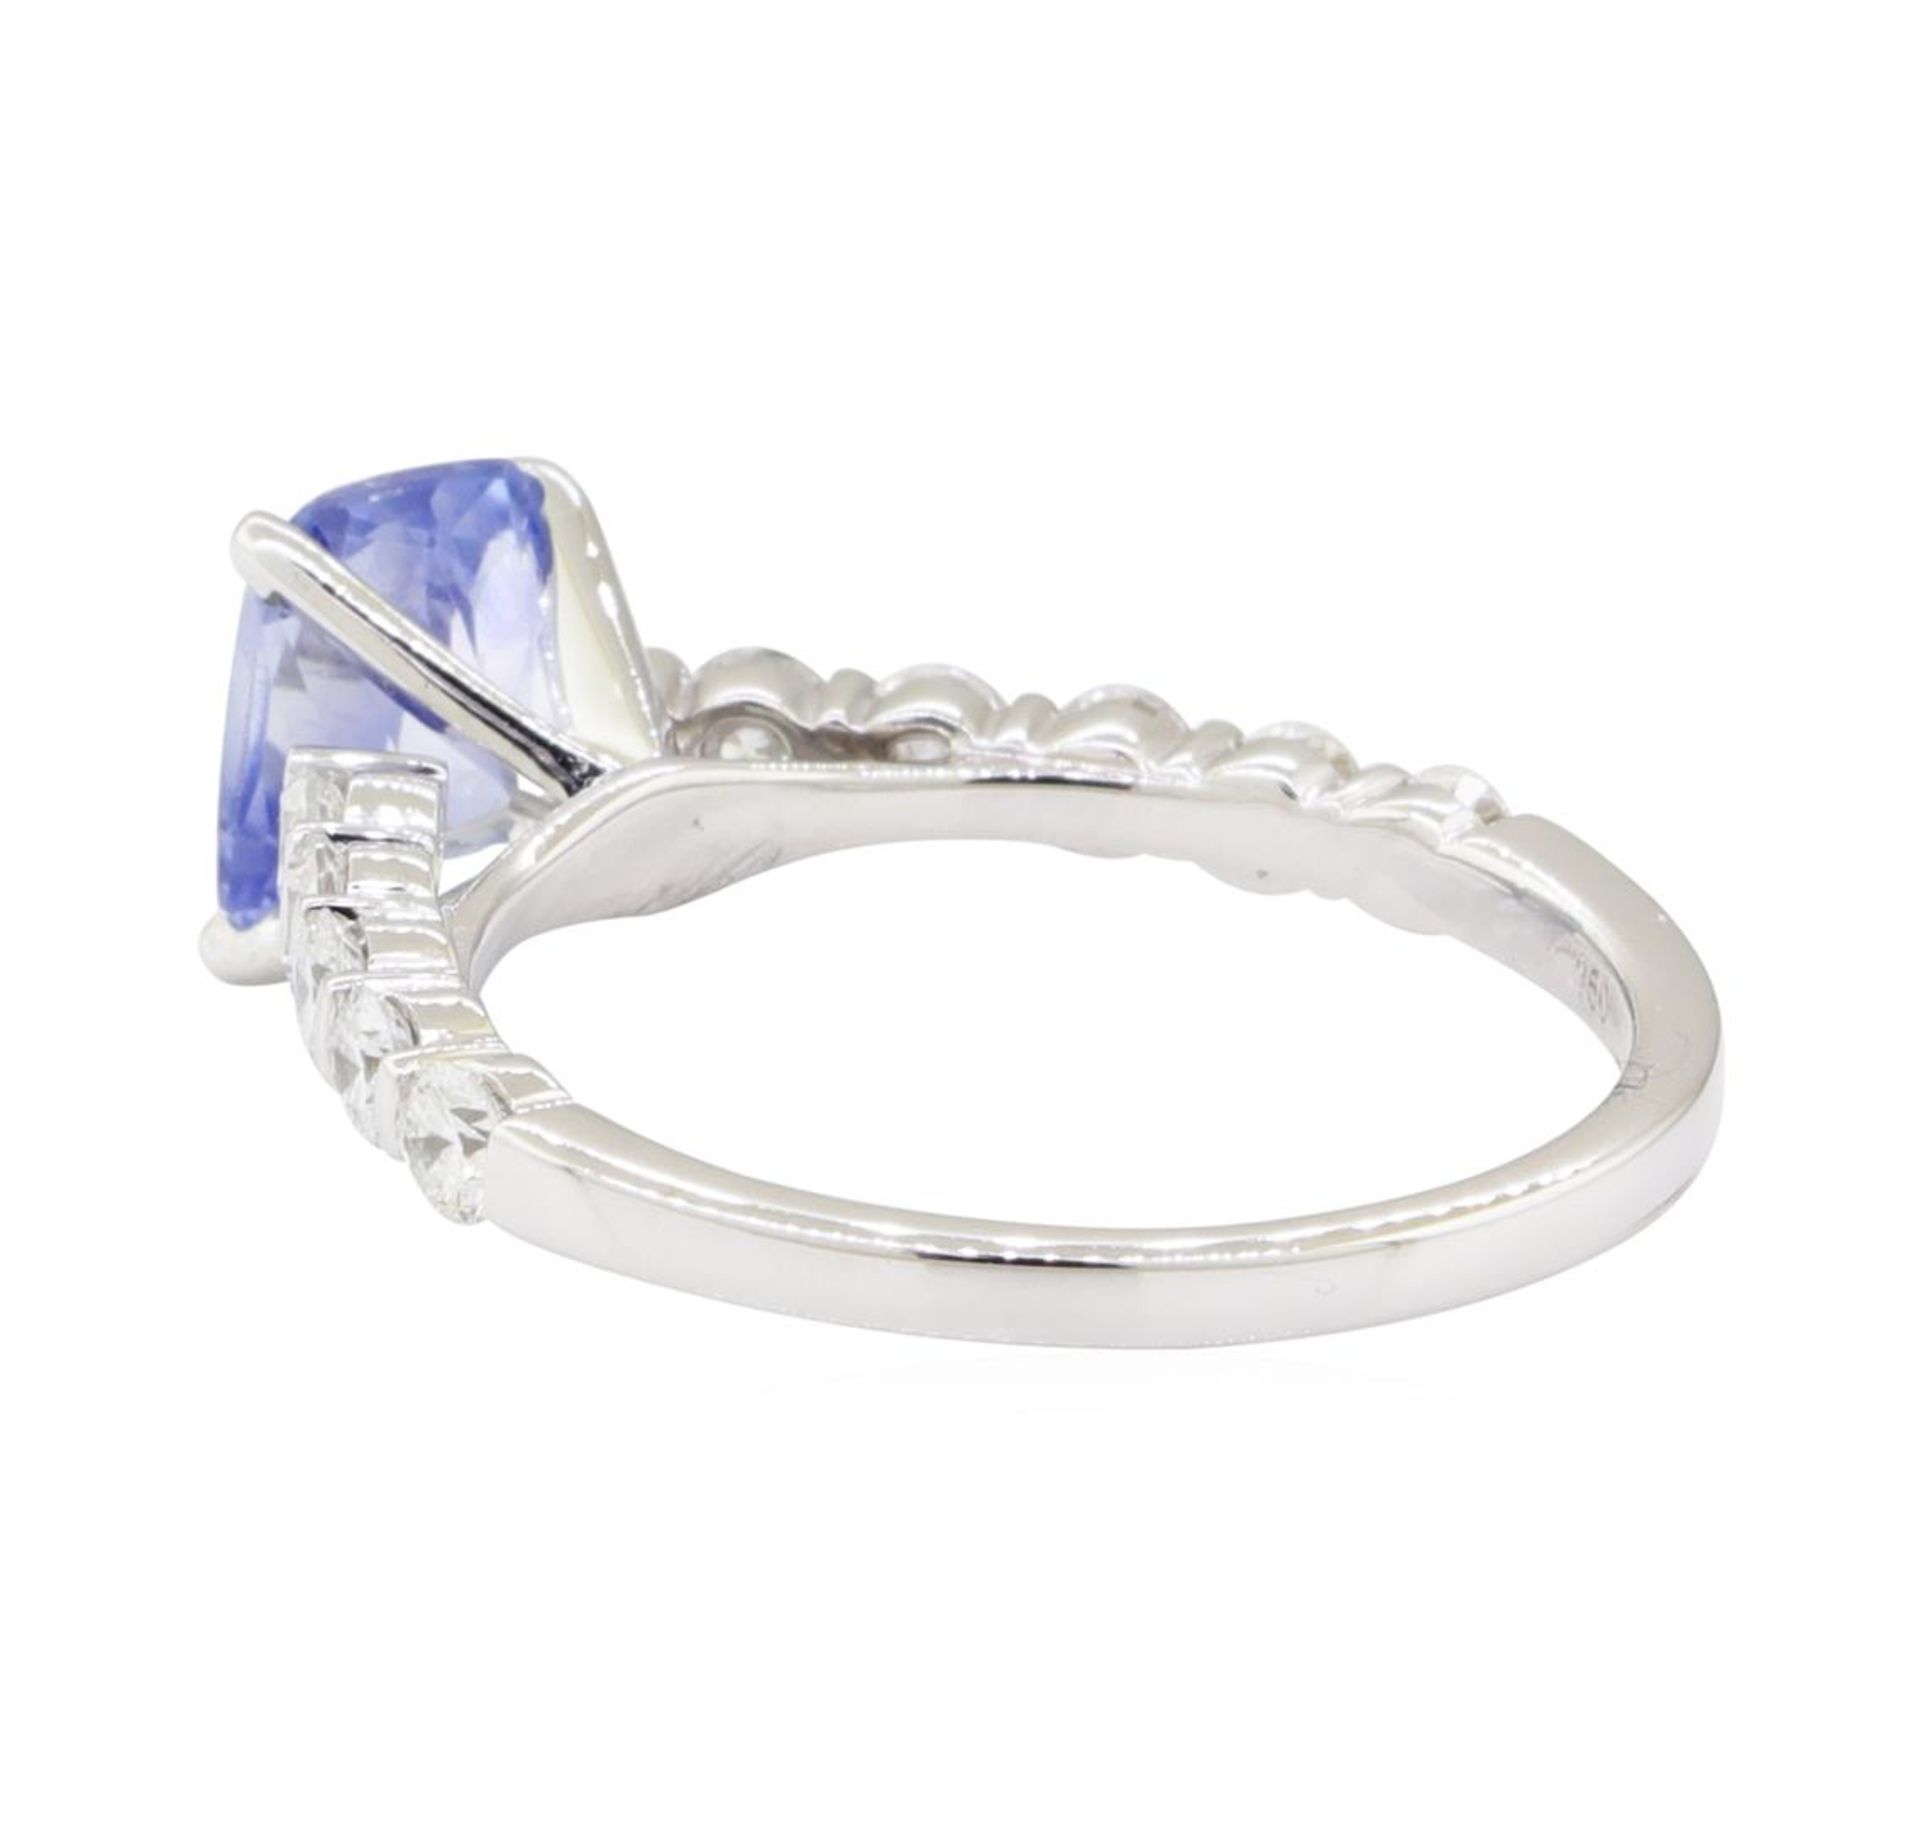 2.34 ctw Sapphire and Diamond Ring - 18KT White Gold - Image 3 of 4